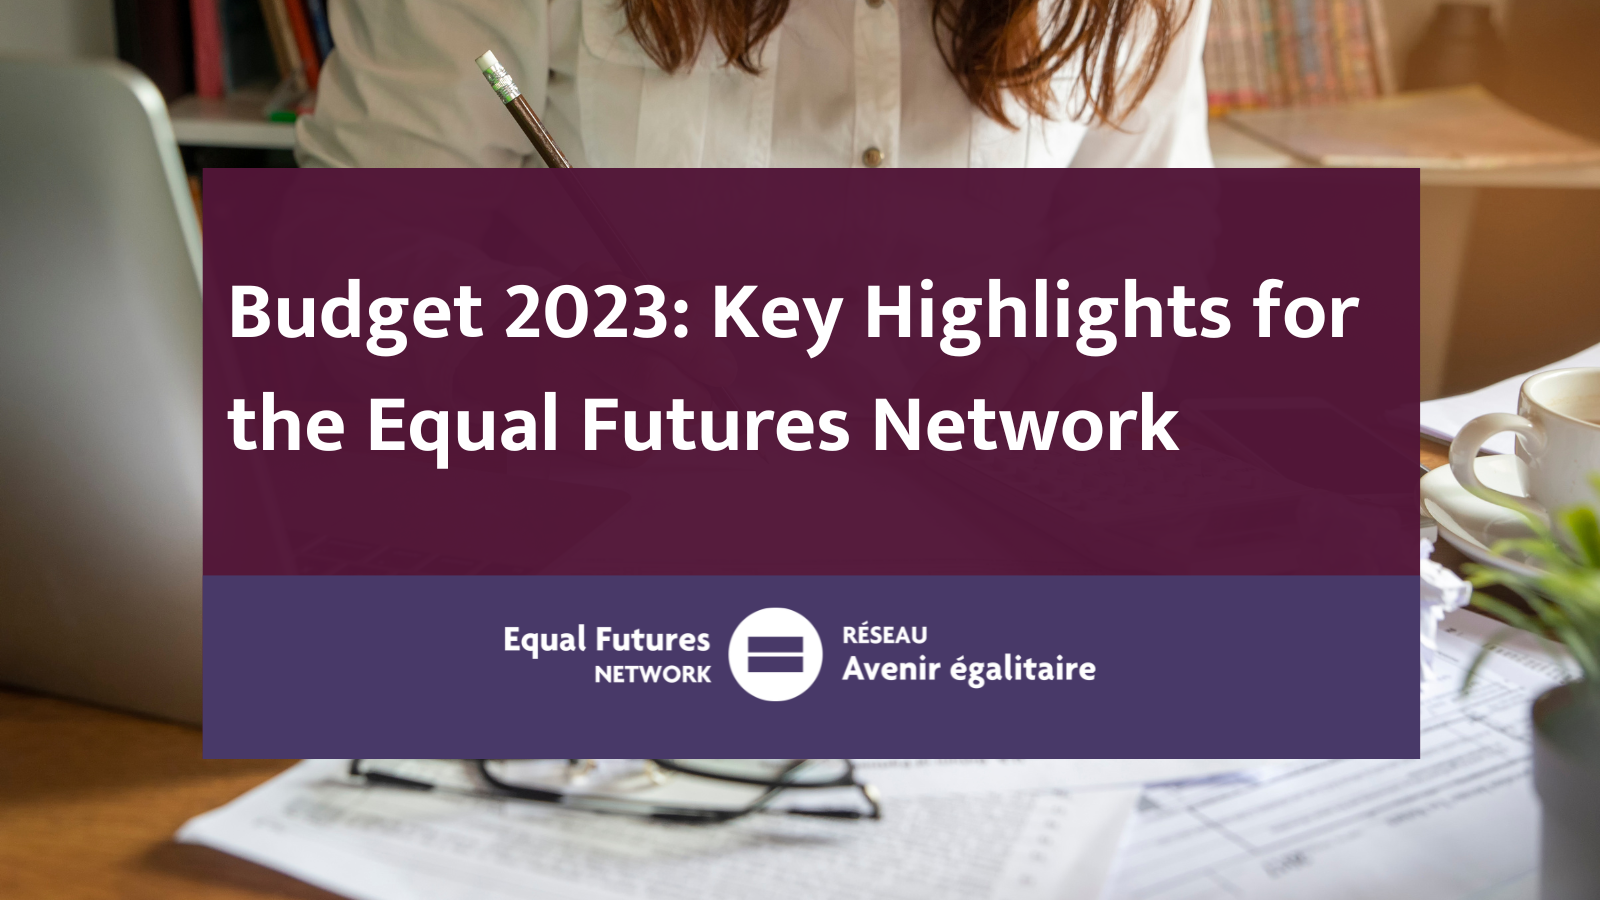 Budget 2023: Key Highlights for the Equal Futures Network